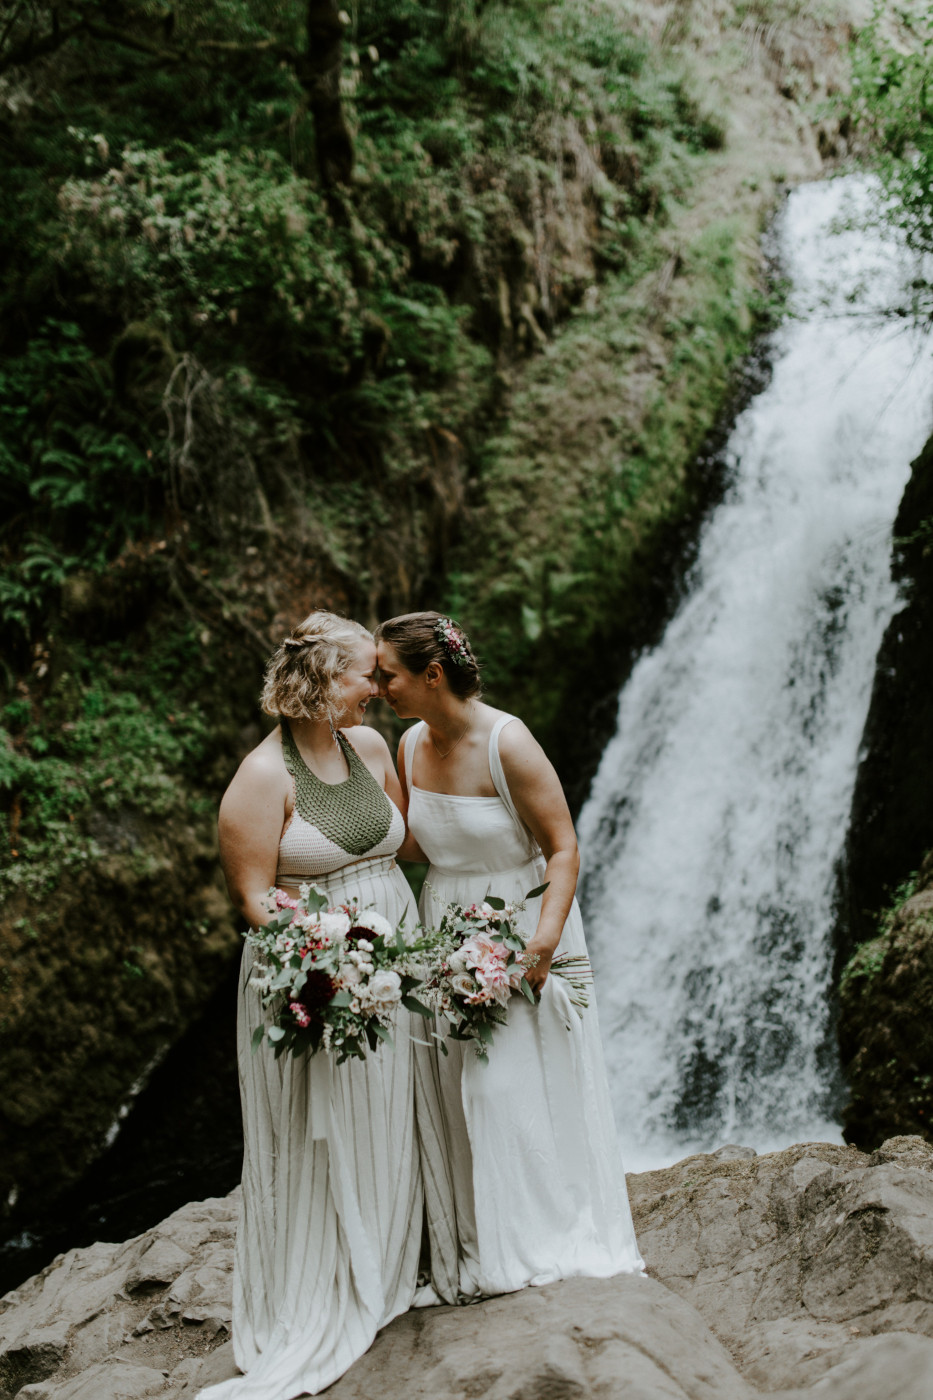 Audrey and kate put their foreheads together in front of Bridal Veil Falls. Elopement wedding photography at Bridal Veil Falls by Sienna Plus Josh.